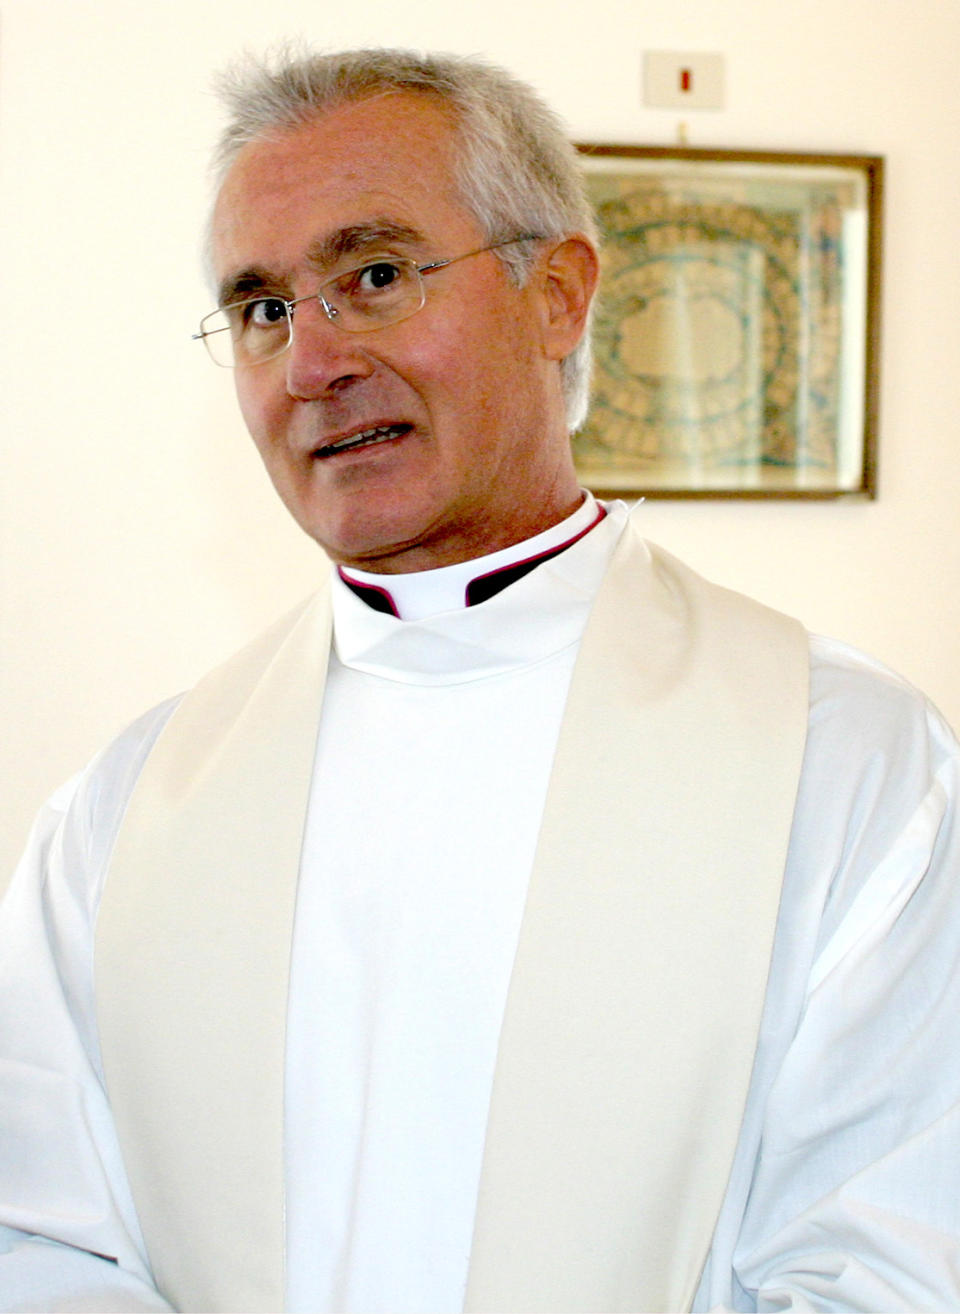 An undated photo of Monsignor Nunzio Scarano in Salerno, Italy. A Vatican monsignor already on trial for allegedly plotting to smuggle 20 million euros ($26 million) from Switzerland to Italy was ordered arrested in a separate case on Tuesday, Jan. 21, 2014 for allegedly using his Vatican bank accounts to launder money. The financial police in the southern city of Salerno said Monsignor Nunzio Scarano's Vatican bank accounts had been used to transfer millions of euros (dollars) in fictitious donations from offshore companies. Police said millions in euros had been seized and that other arrest warrants were issued. Scarano's lawyer, Silverio Sica, said his client merely took donations from people he thought were acting in good faith to fund a home for the terminally ill. He conceded that the money ended up being used to pay off Scarano's mortgage, however. (AP Photo/Francesco Pecoraro)